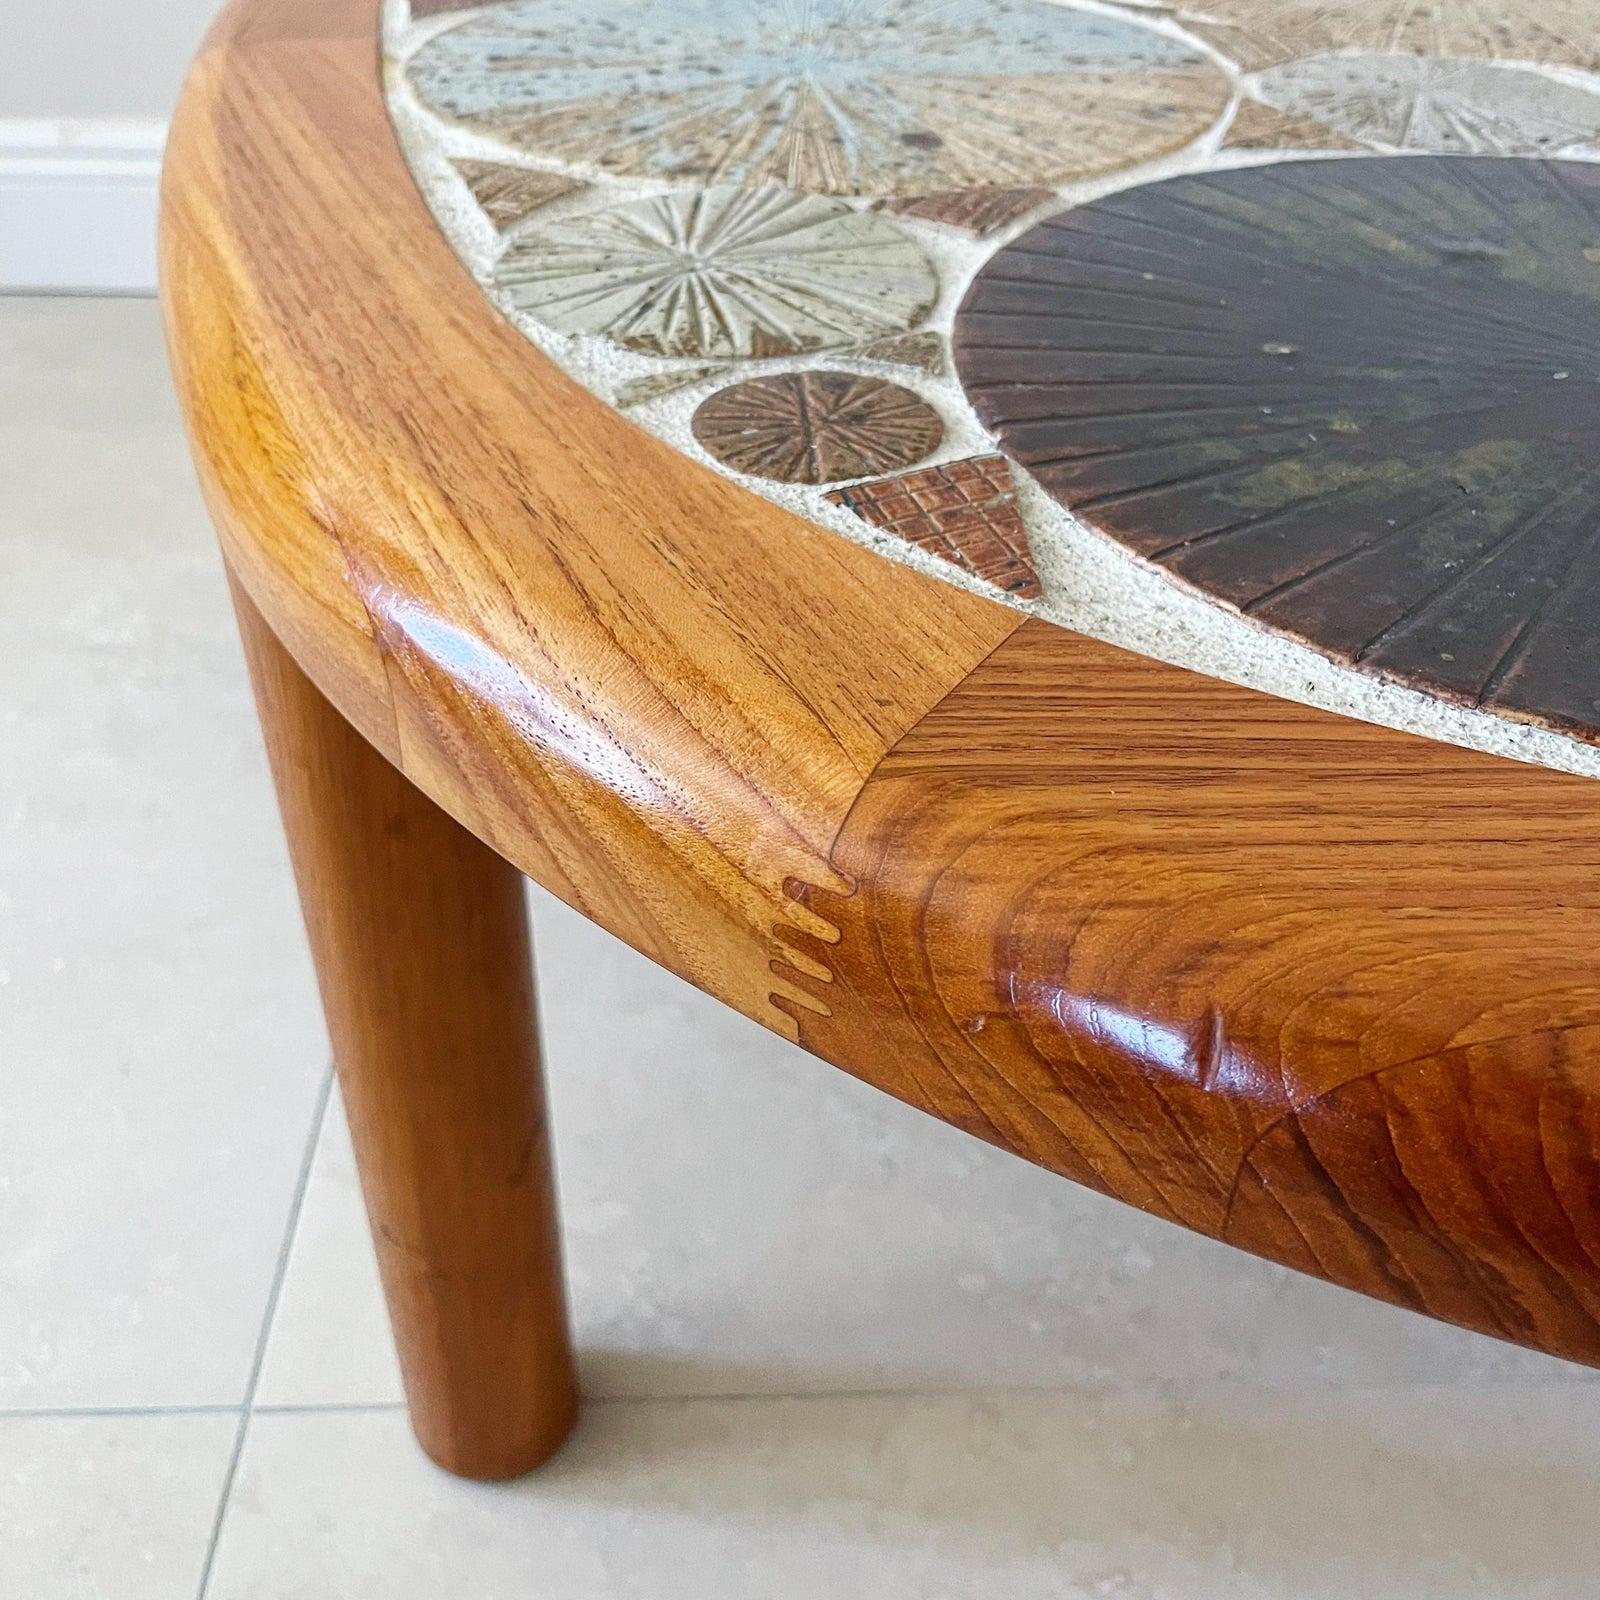 Hand-Crafted Tue Poulsen Haslev Denmark Oval Teak and Ceramic Art Coffee Table, 1960s